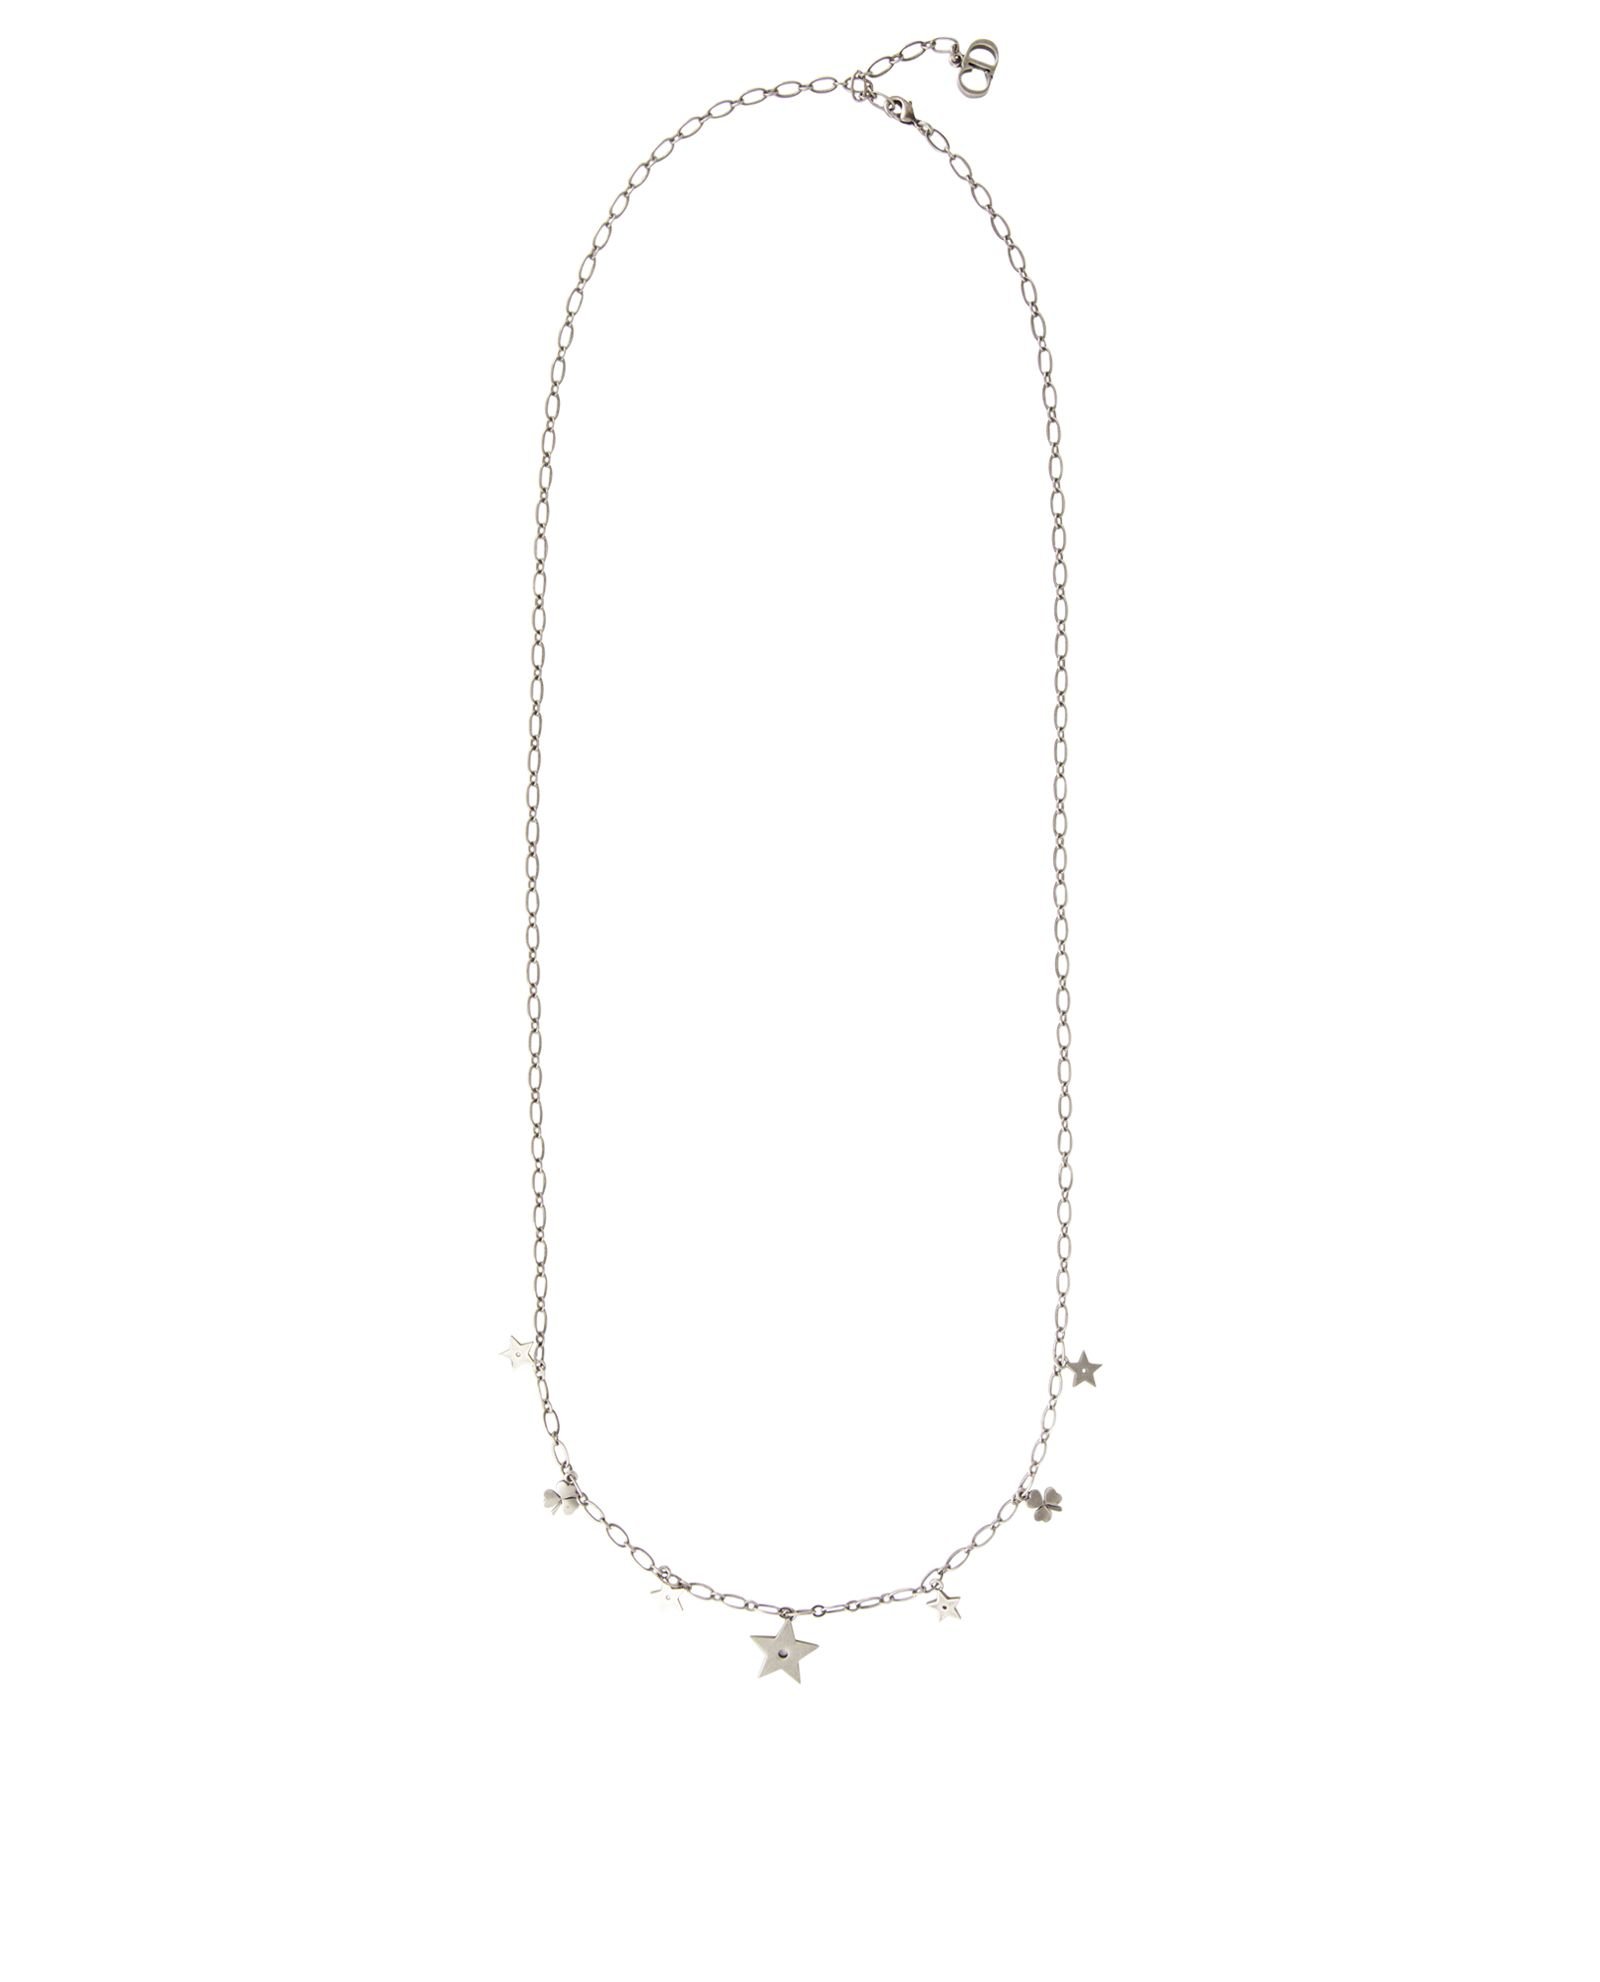 Christian Dior Star And Clover Charm Necklace